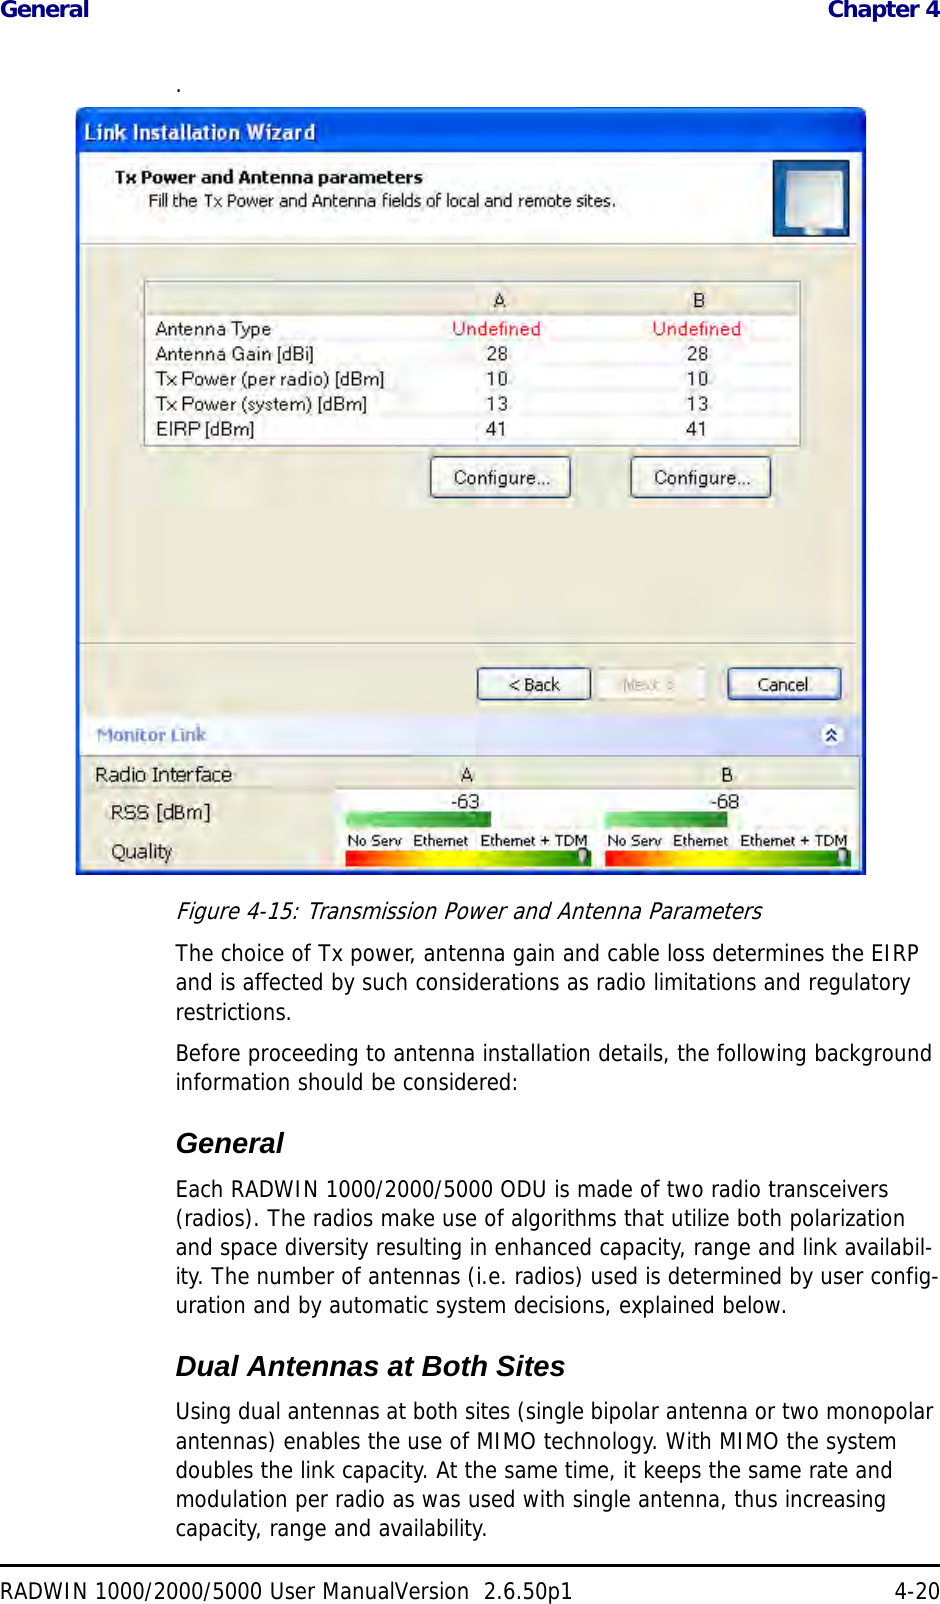 General  Chapter 4RADWIN 1000/2000/5000 User ManualVersion  2.6.50p1 4-20.Figure 4-15: Transmission Power and Antenna ParametersThe choice of Tx power, antenna gain and cable loss determines the EIRP and is affected by such considerations as radio limitations and regulatory restrictions.Before proceeding to antenna installation details, the following background information should be considered:GeneralEach RADWIN 1000/2000/5000 ODU is made of two radio transceivers (radios). The radios make use of algorithms that utilize both polarization and space diversity resulting in enhanced capacity, range and link availabil-ity. The number of antennas (i.e. radios) used is determined by user config-uration and by automatic system decisions, explained below. Dual Antennas at Both SitesUsing dual antennas at both sites (single bipolar antenna or two monopolar antennas) enables the use of MIMO technology. With MIMO the system doubles the link capacity. At the same time, it keeps the same rate and modulation per radio as was used with single antenna, thus increasing capacity, range and availability.